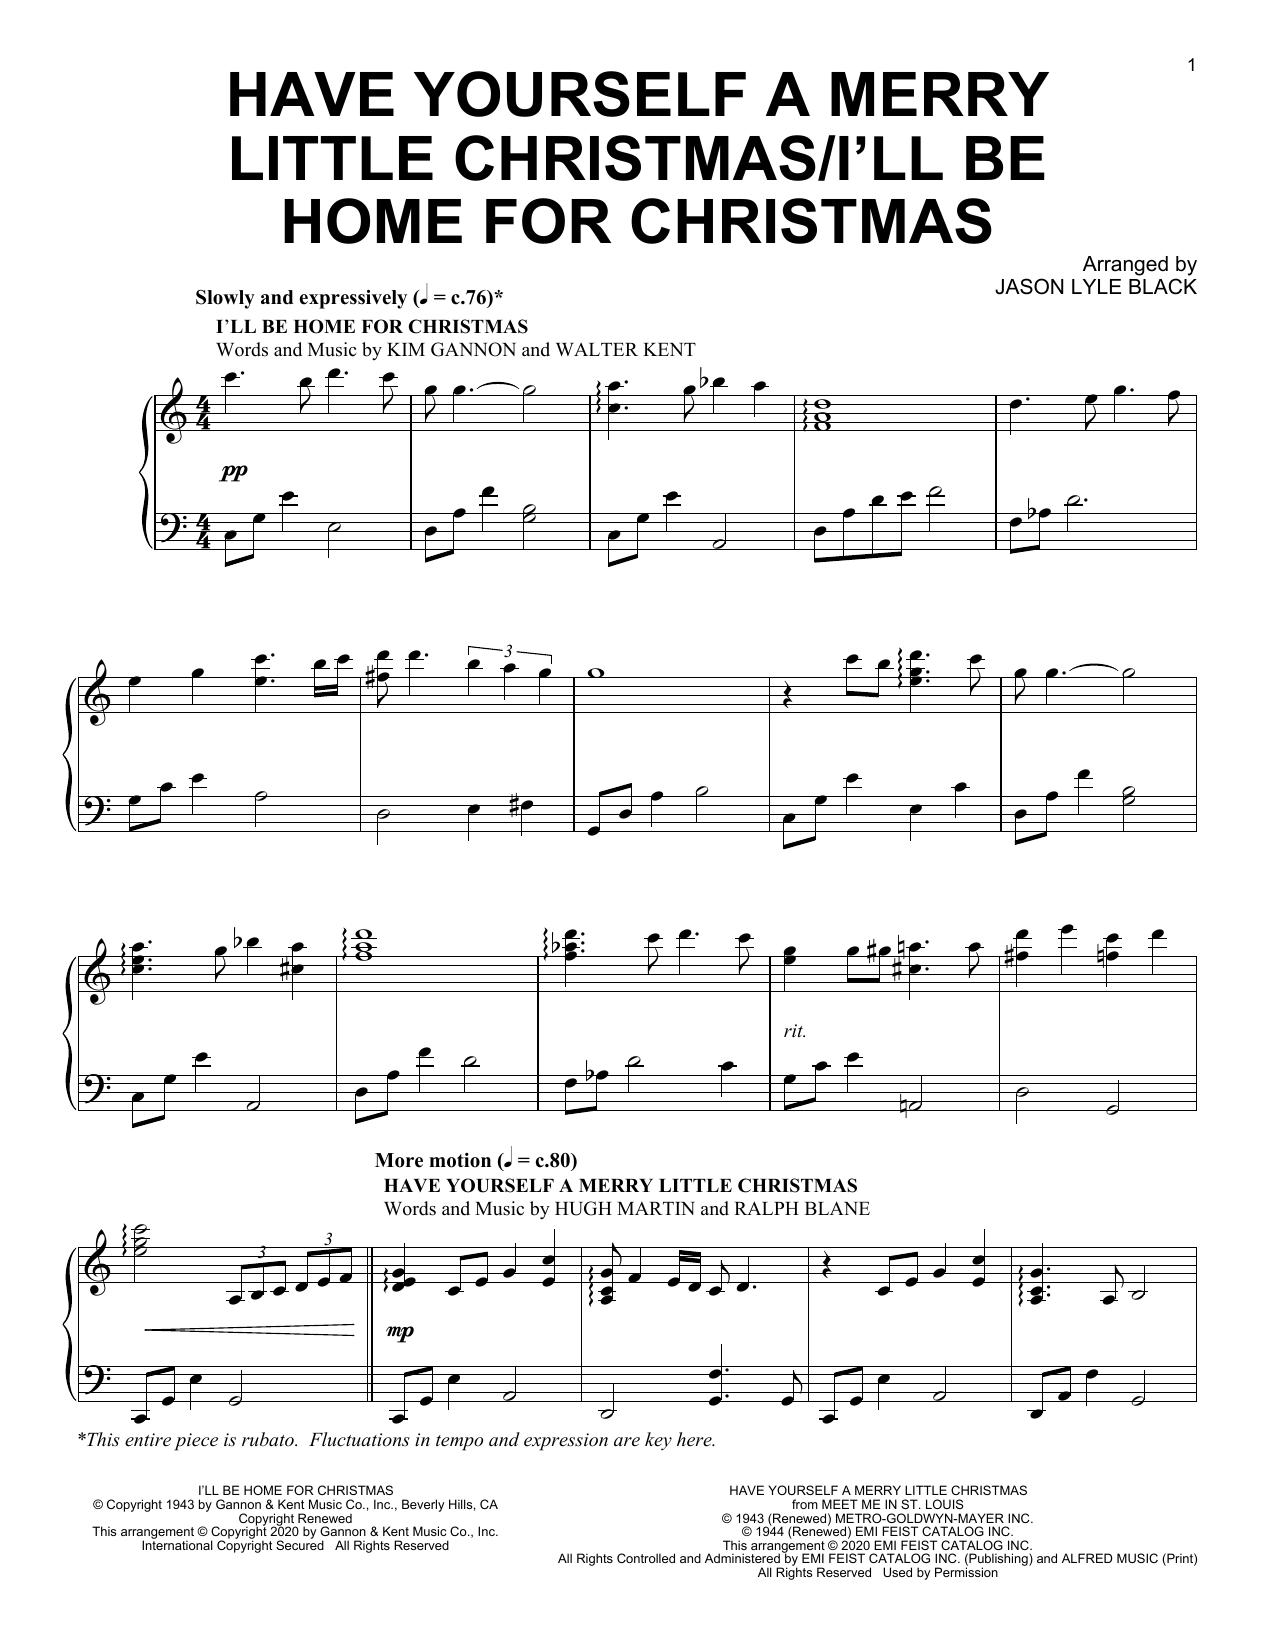 Download Jason Lyle Black Have Yourself A Merry Little Christmas/ Sheet Music